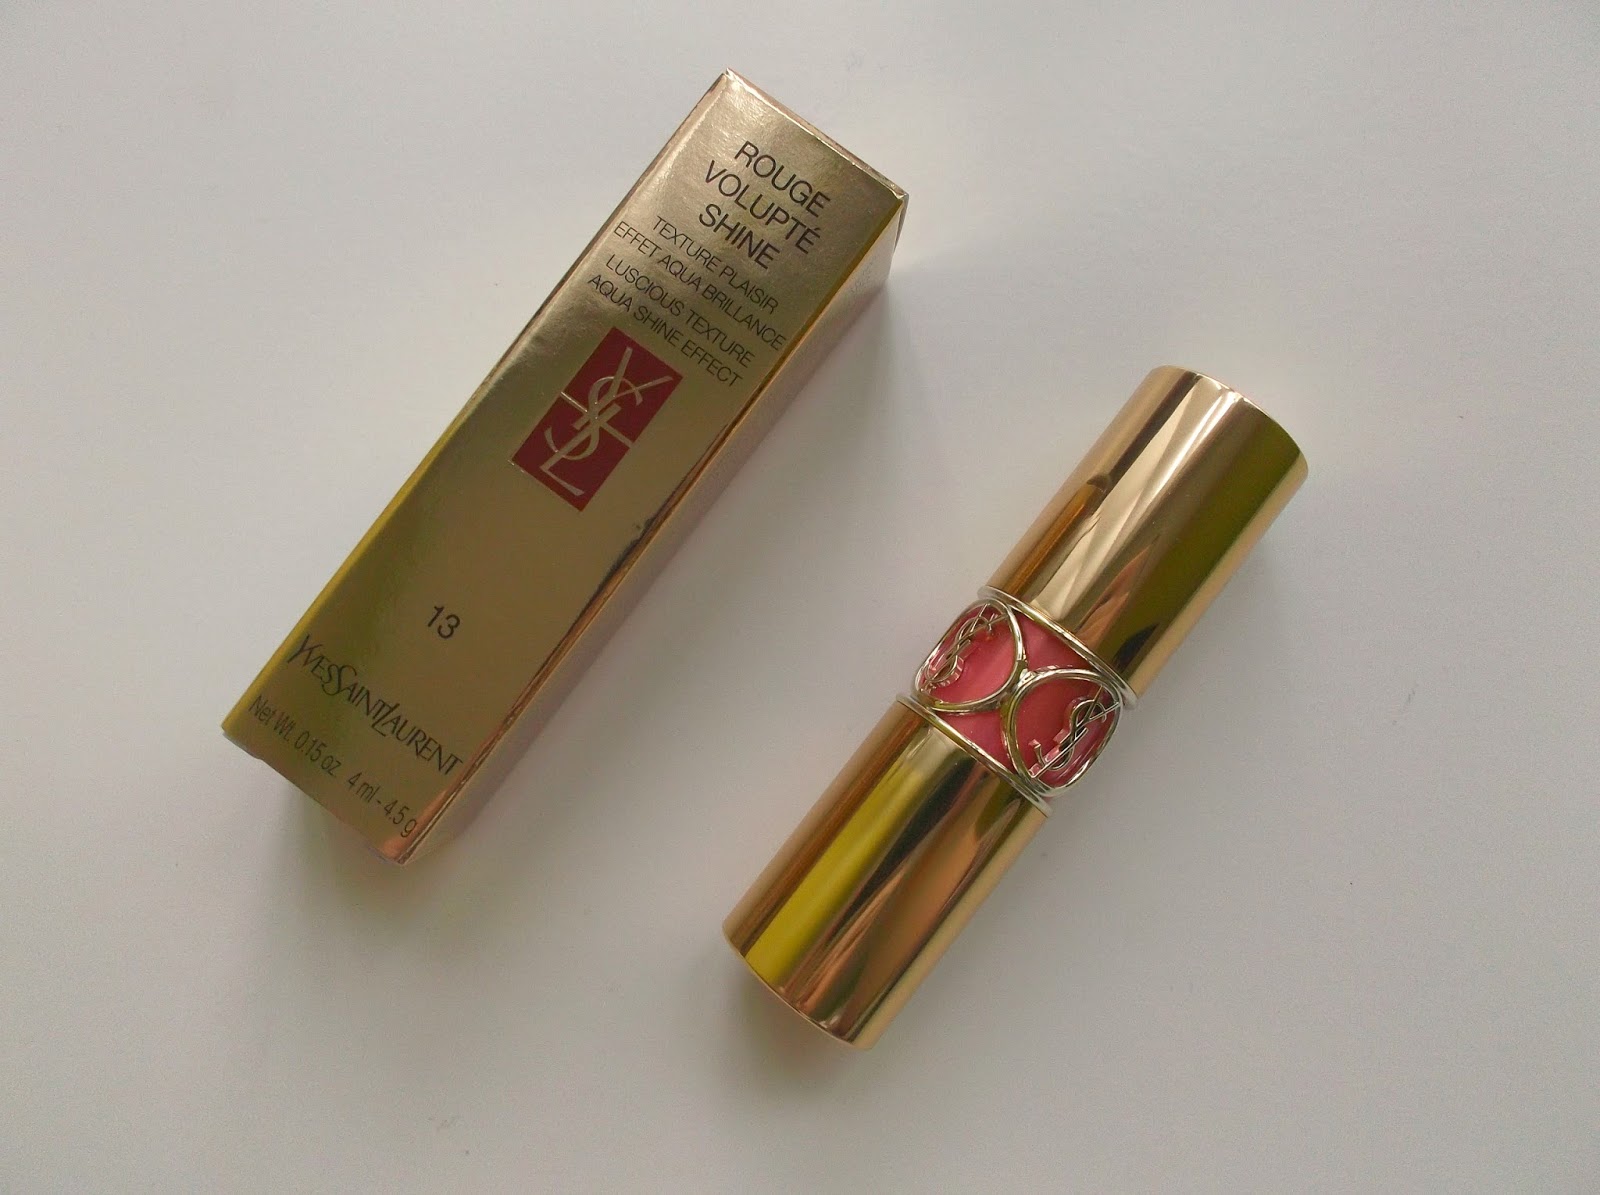 Review & Swatches: YSL Rouge Volupte Shine Oil-in-Stick Lipstick